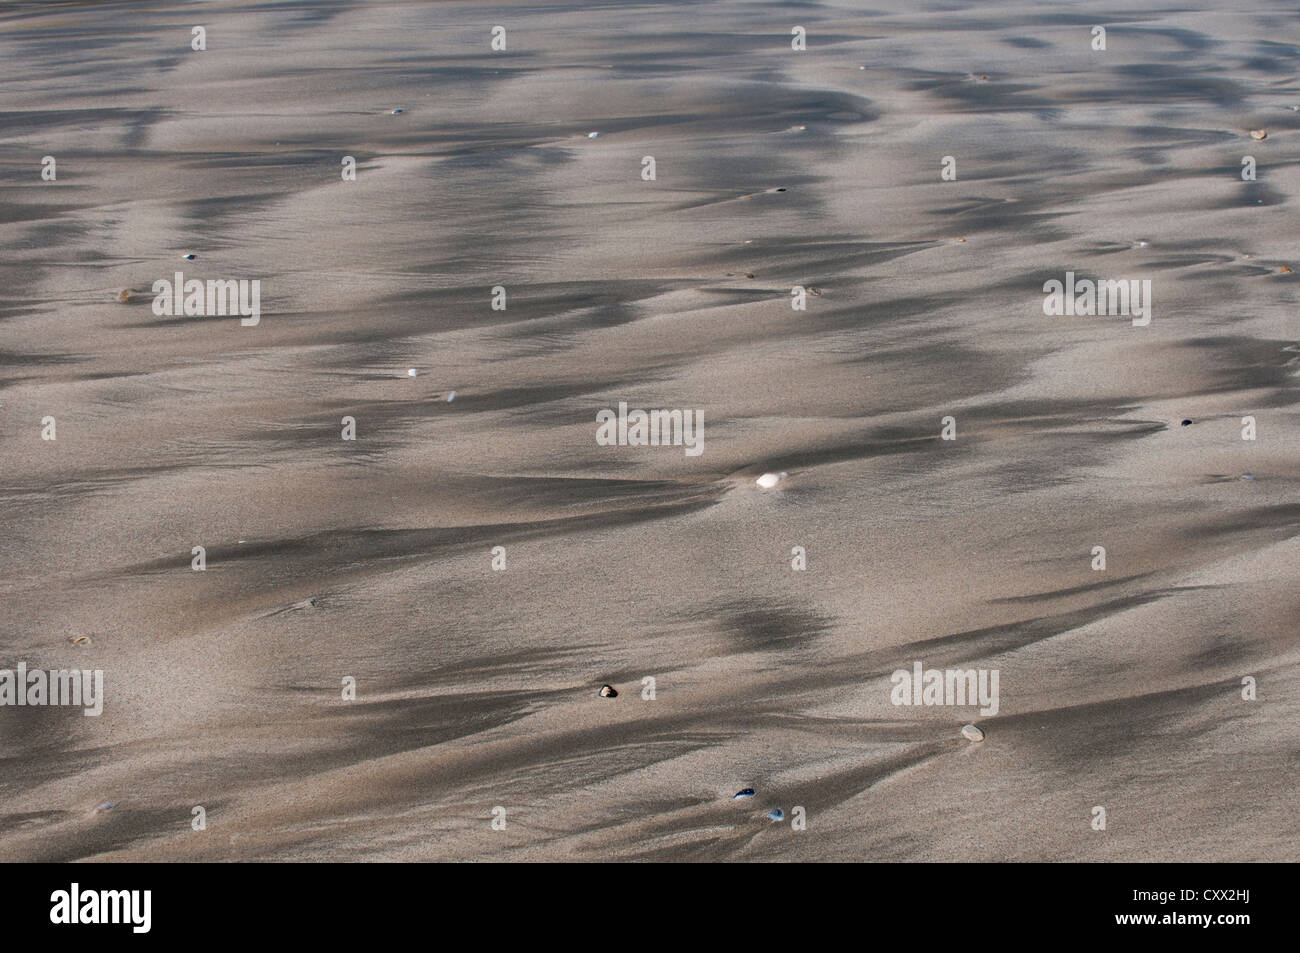 Beach patterns caused by the retreating tide leaving rivulets and meanders in the sand, Stock Photo